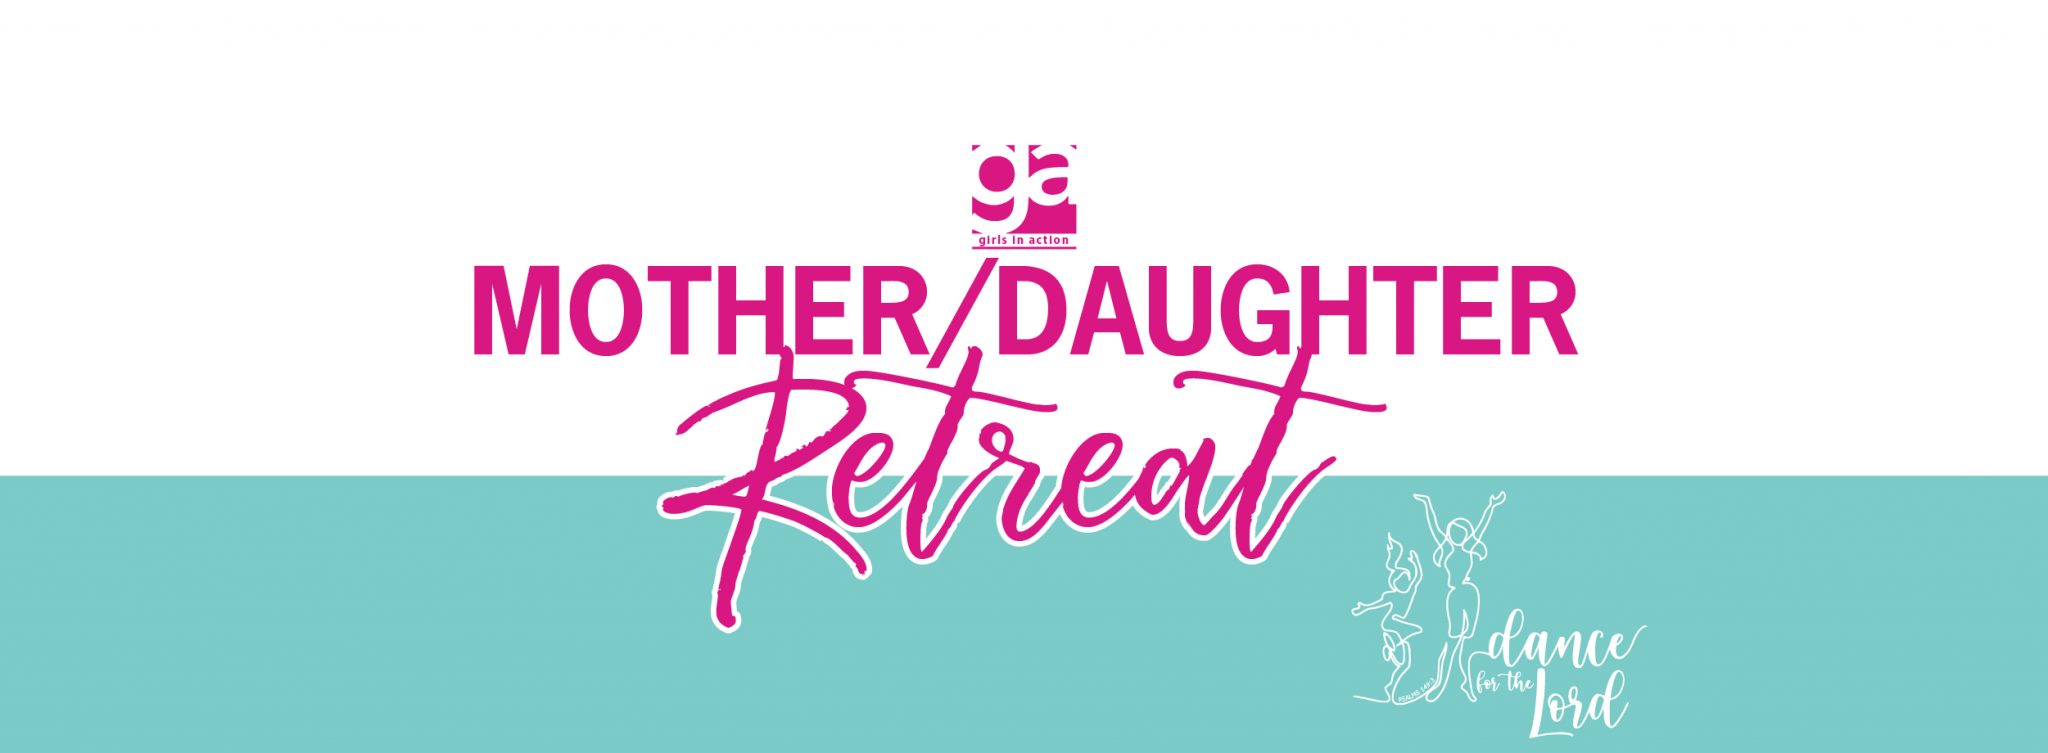 GA Mother/Daughter Retreat First Baptist Church Olive Branch